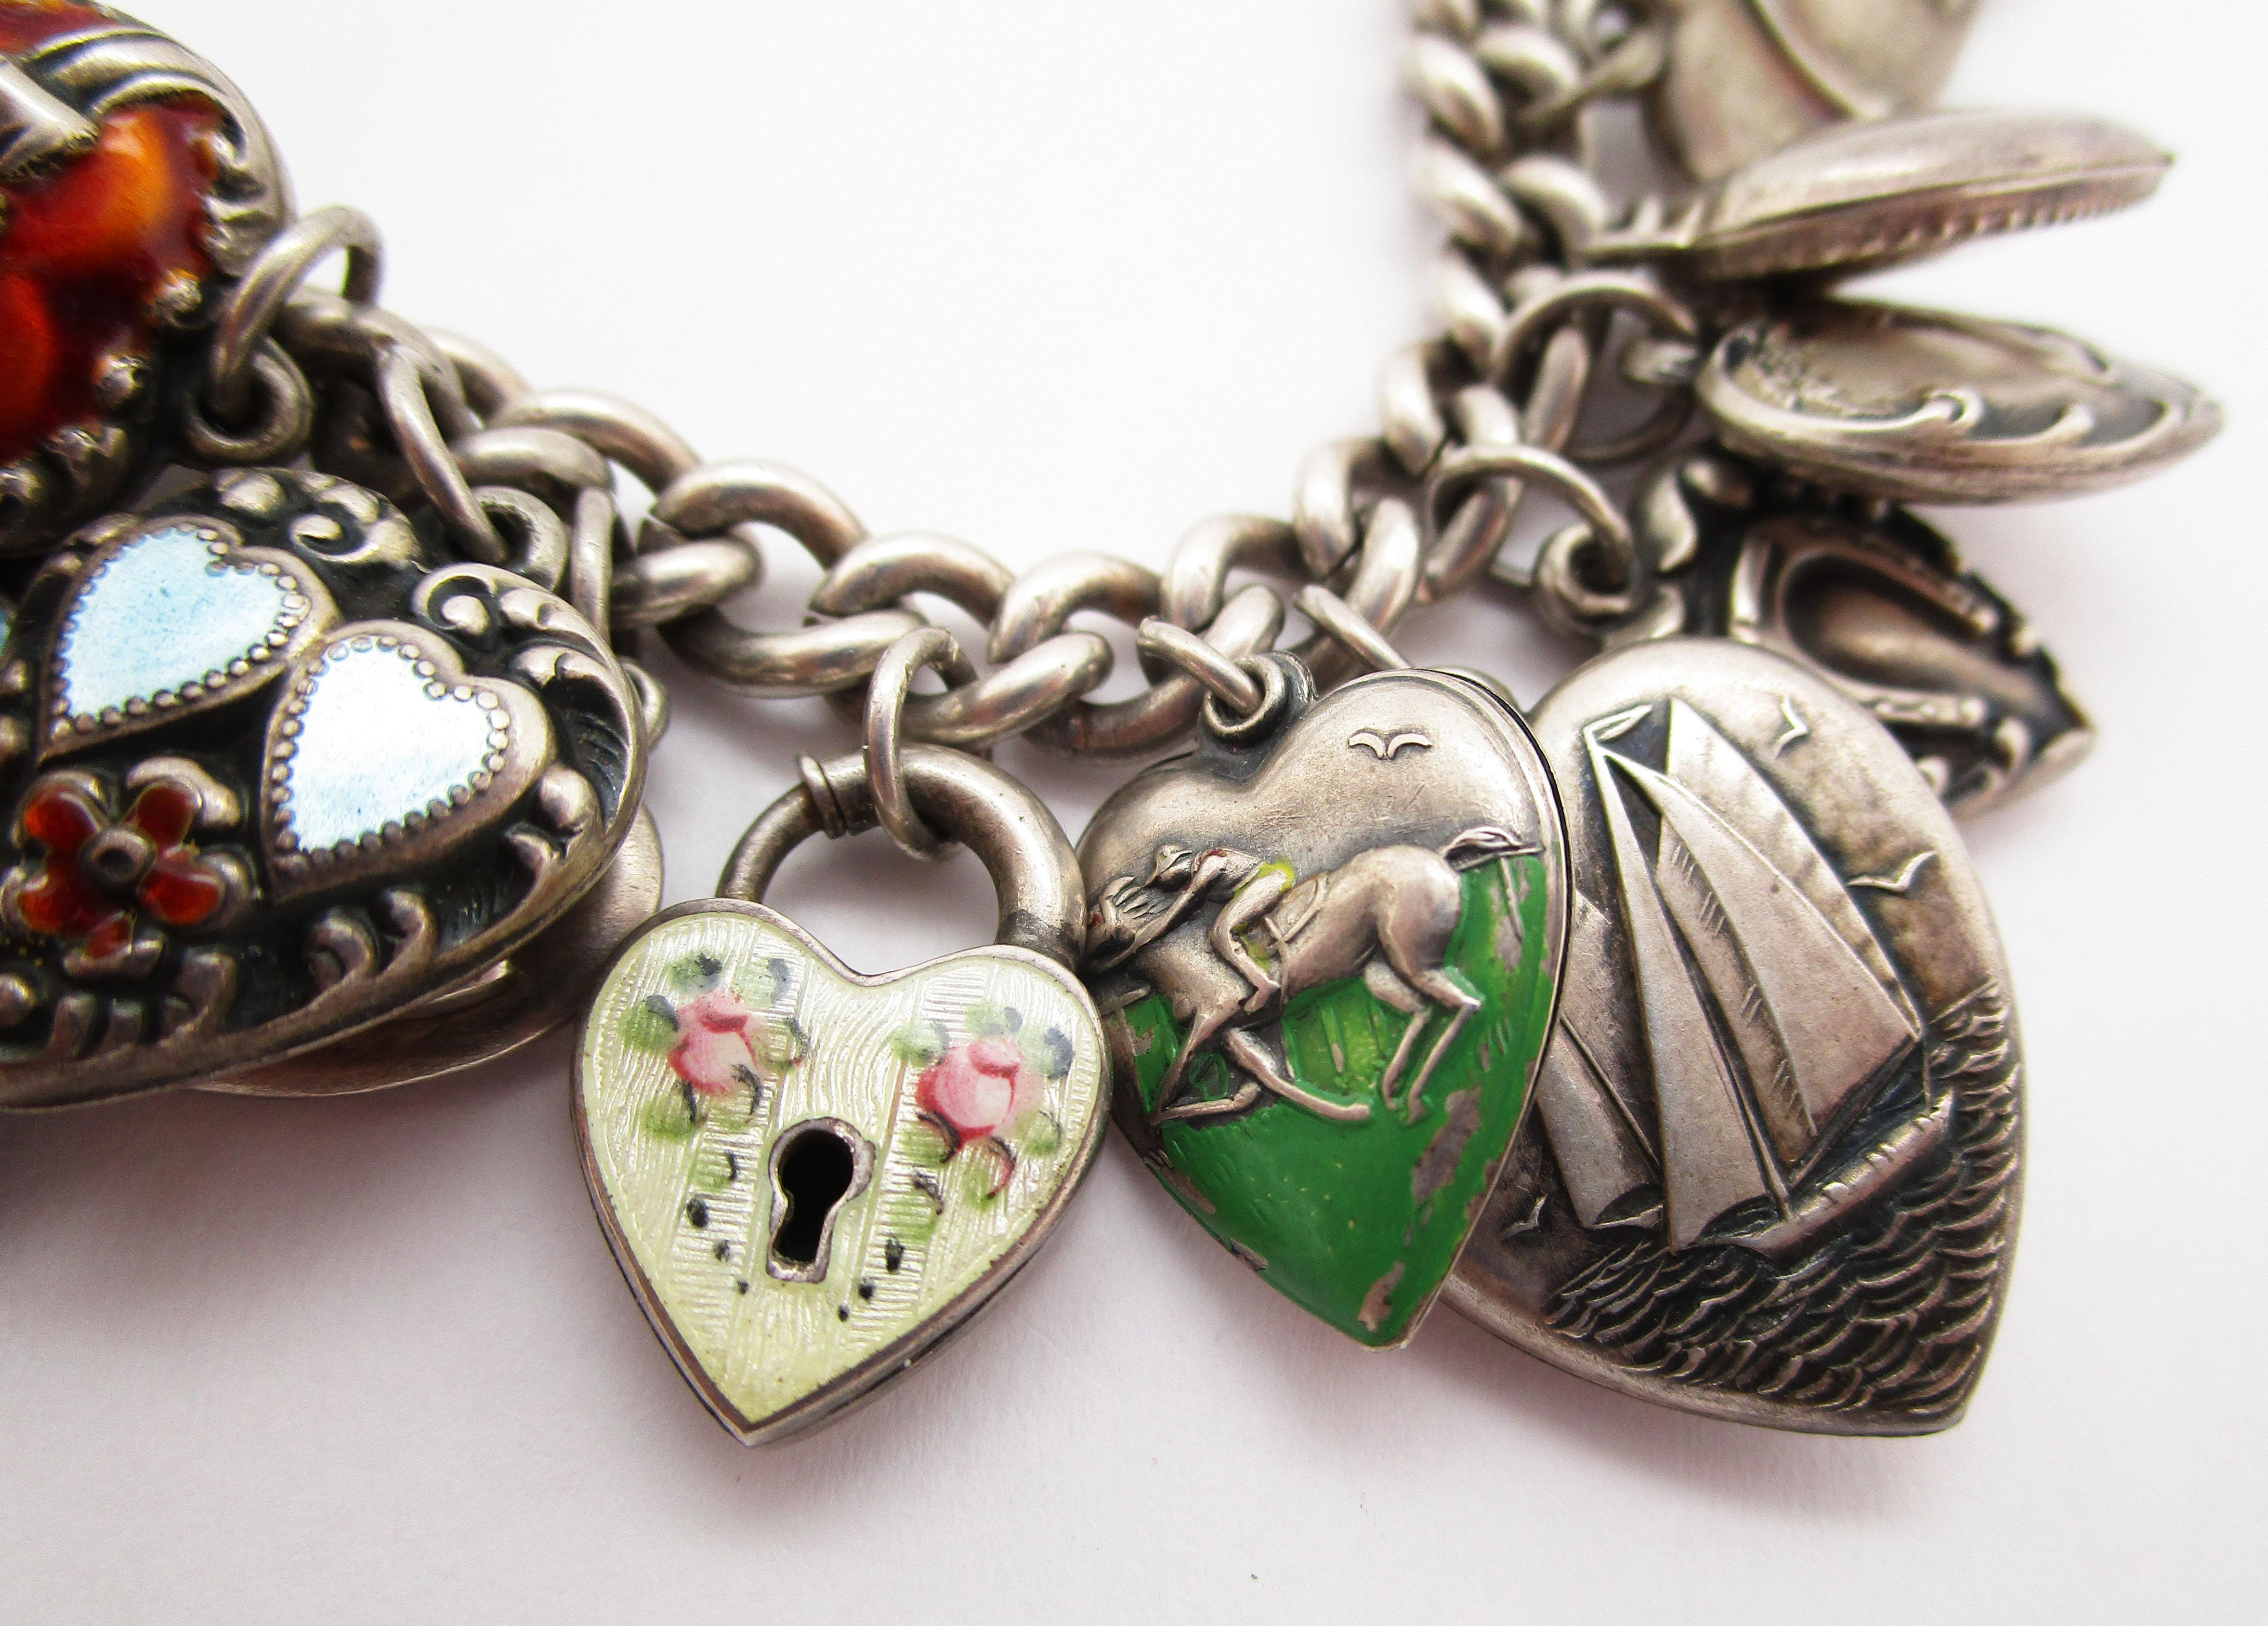 This is a gorgeous Art Deco charm bracelet in sterling silver with dozens of beautiful enameled love heart charms! In a definitive WWII look, this bracelet incorporates hearts, aviators, cornucopias, florals, sailboats, and horses on hearts. It is